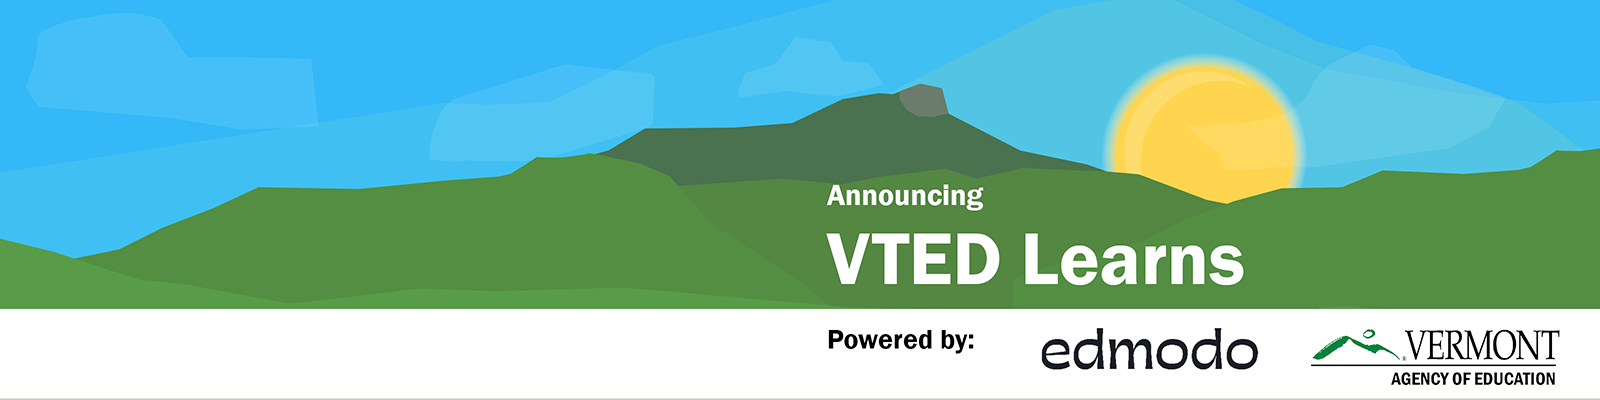 Announcing VTED Learns, Powered by Edmodo and the Vermont Agency of Education